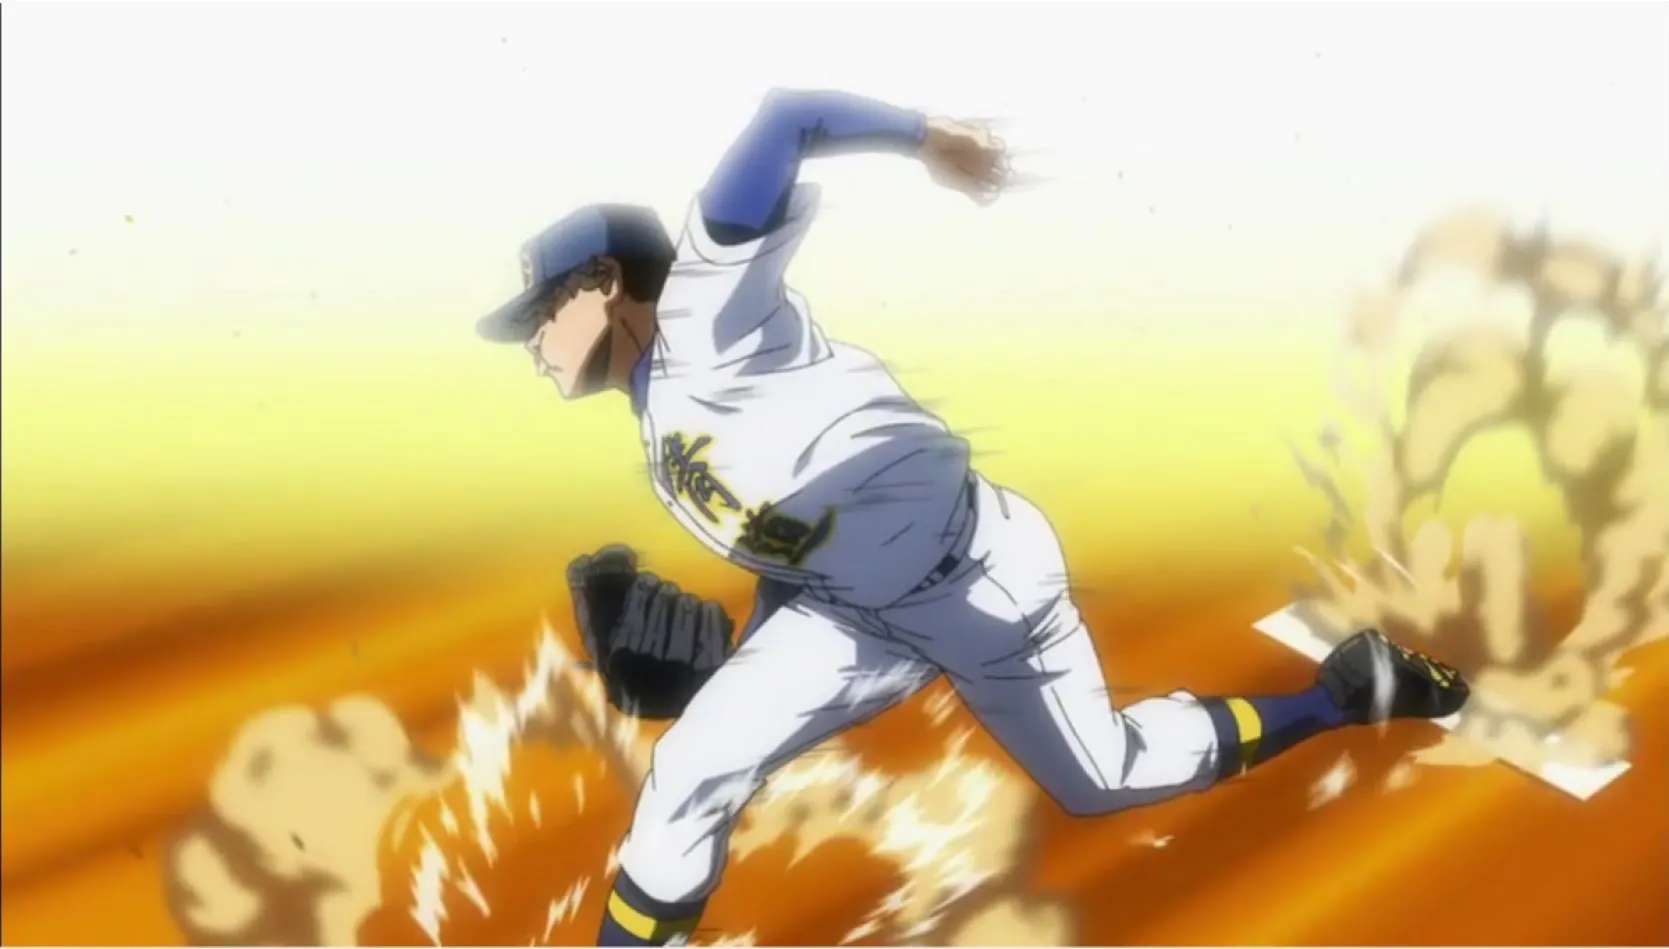 A player from ace of diamond running